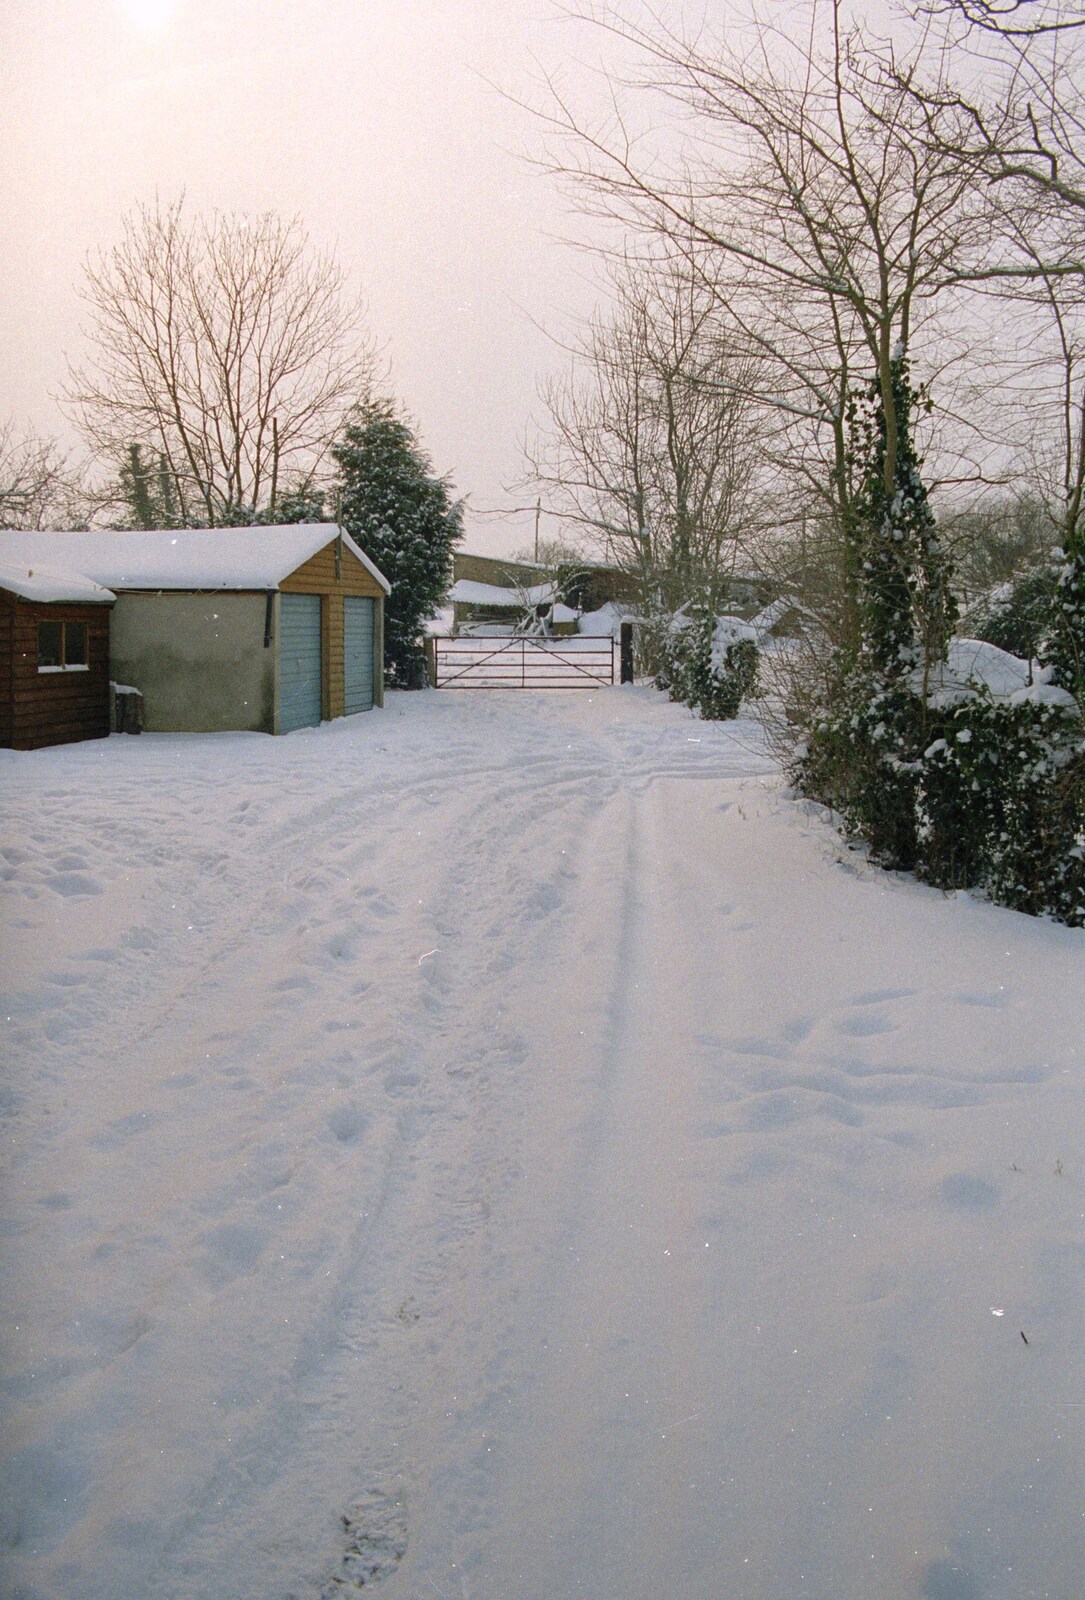 Nosher's driveway from Snow Days, Stuston and Norwich, Suffolk and Norfolk - 4th February 1991